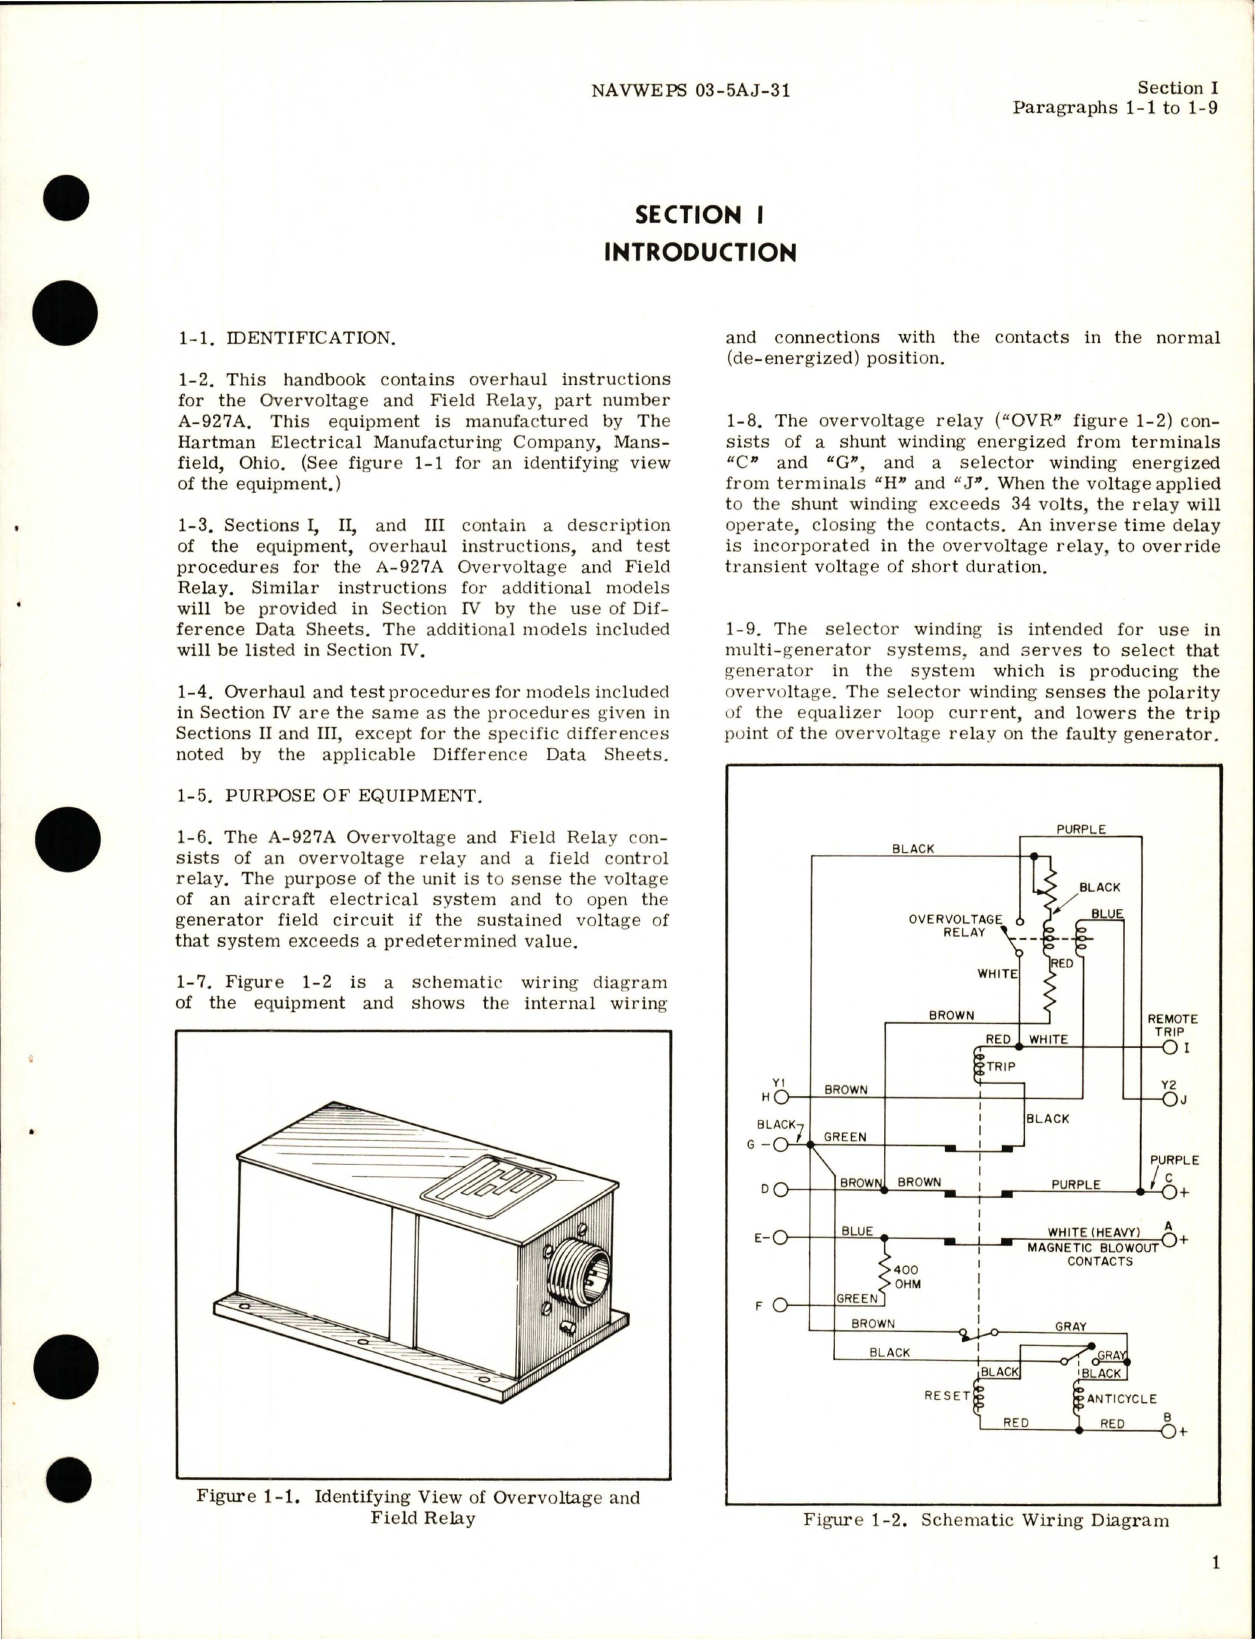 Sample page 5 from AirCorps Library document: Overhaul Instructions for Overvoltage and Field Relay - Part A-927A 